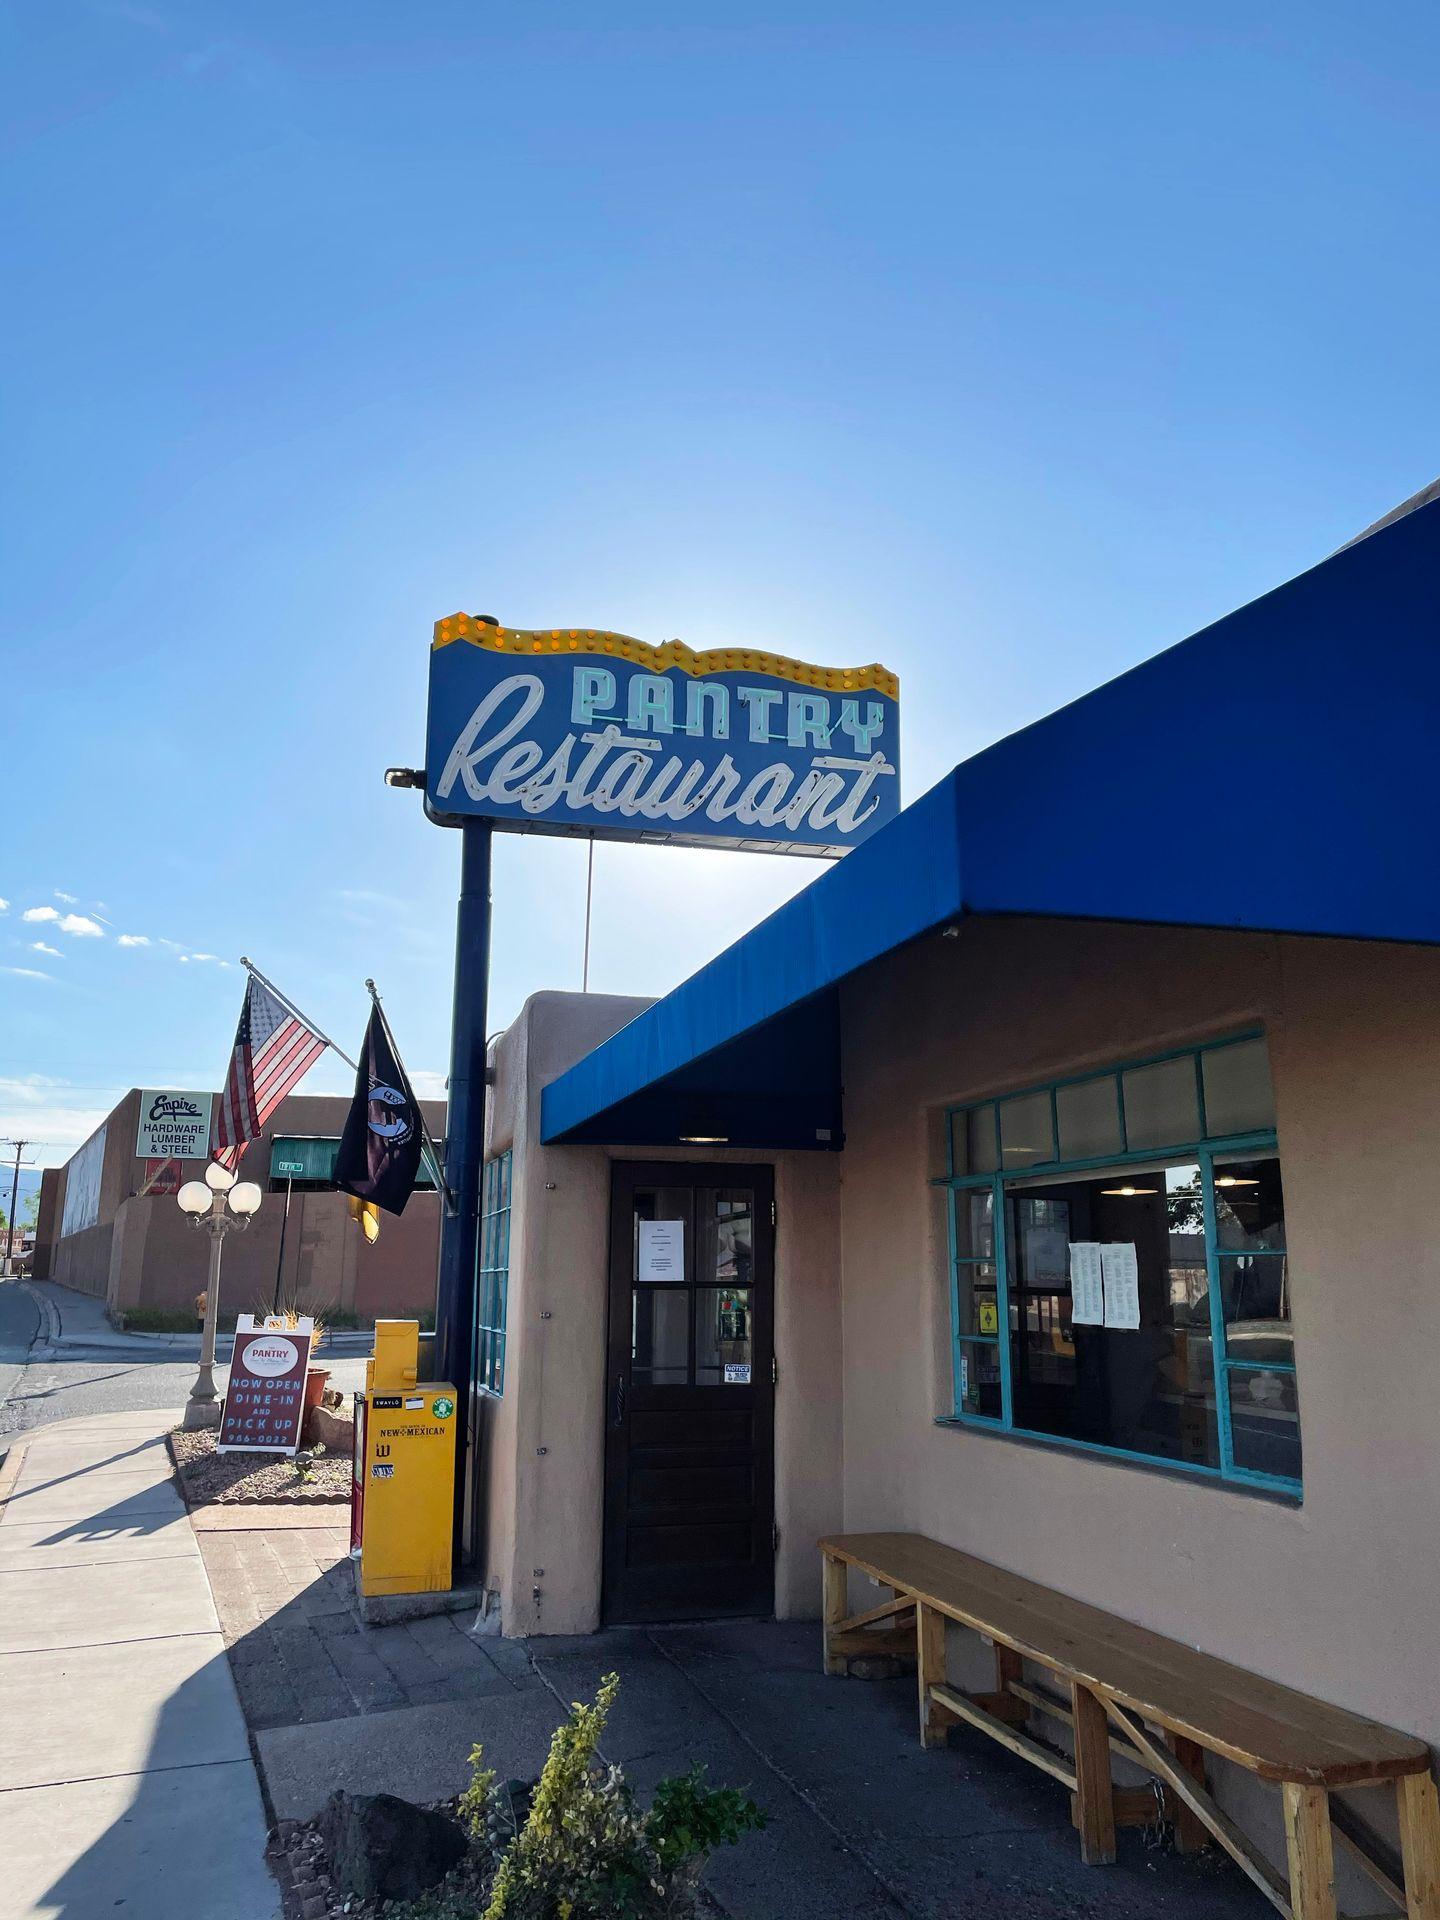 The exterior of The Pantry restaurant. There is a blue awning and a blue sign.